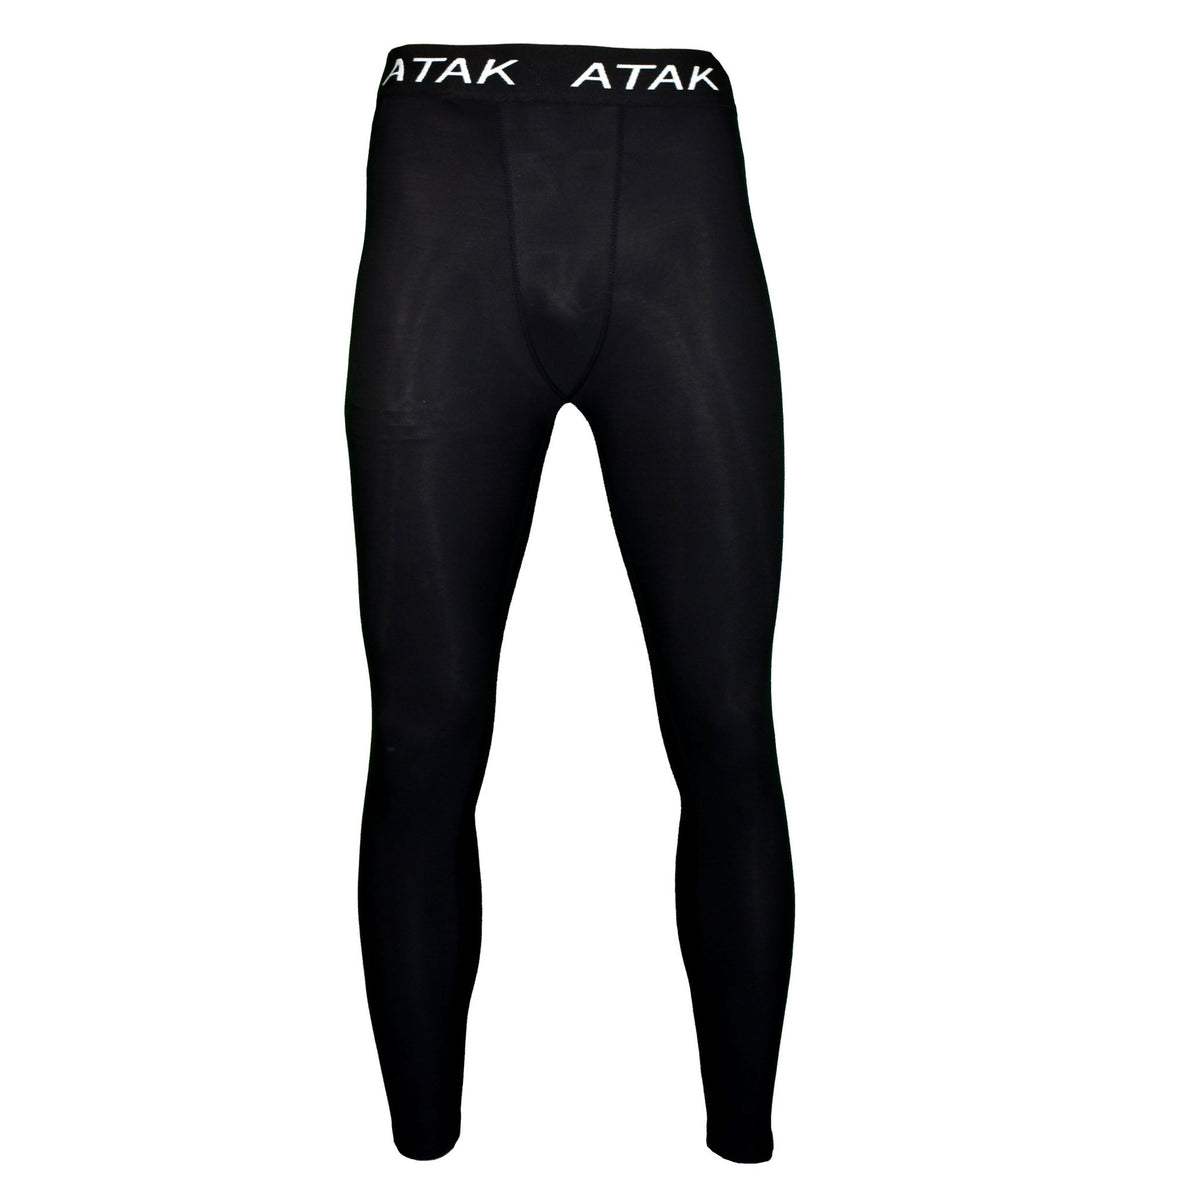 Men's Compression Tights Black |Pants | ATAK Sports | Absolute Rugby